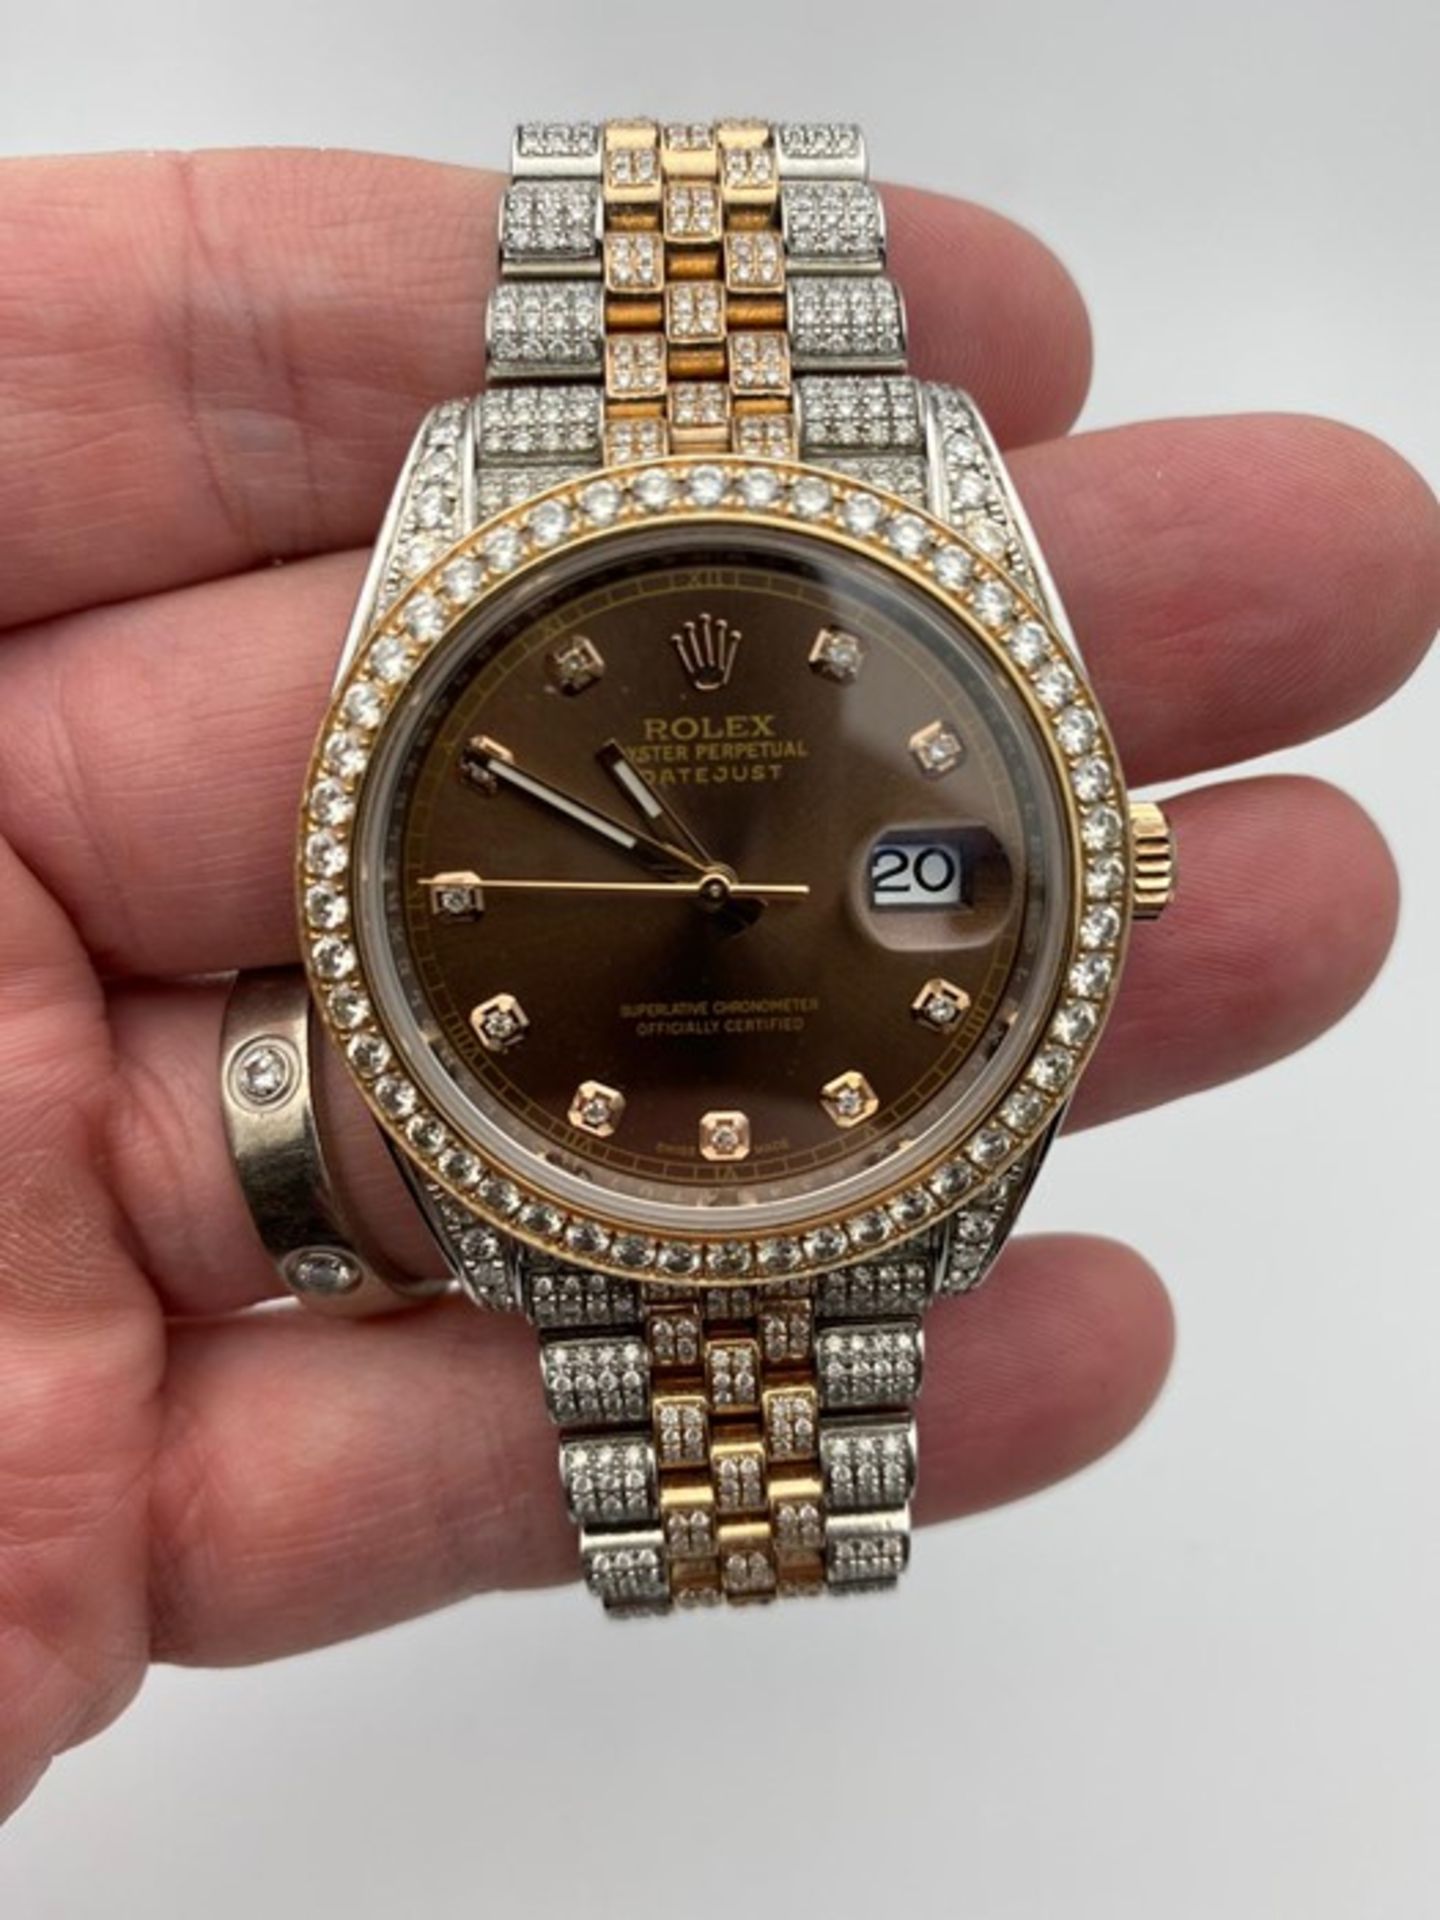 ROLEX DATEJUST GENTS DIAMOND ENCRUSTED, BIMETAL 18CT GOLD AND STAINLESS STEEL - Image 5 of 6